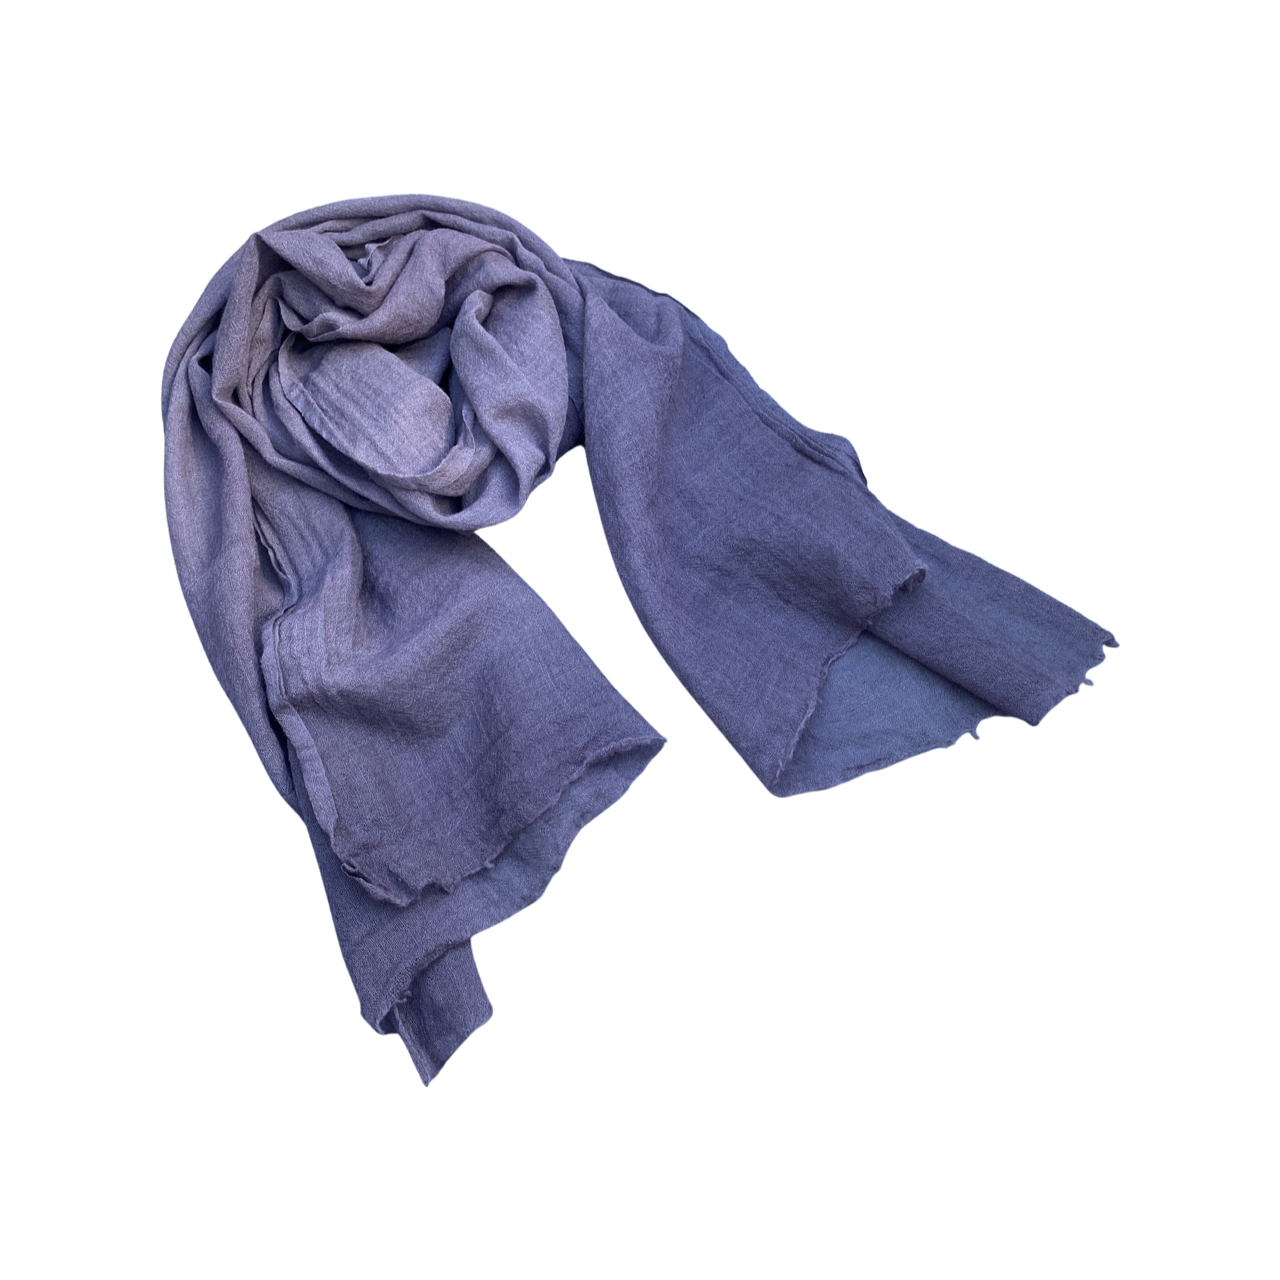 Hand-Dyed Wool Gauze Scarf in Cobblestone Color by 1 Life - Hand-Dyed Wool Scarf for Warm or Cold Weather